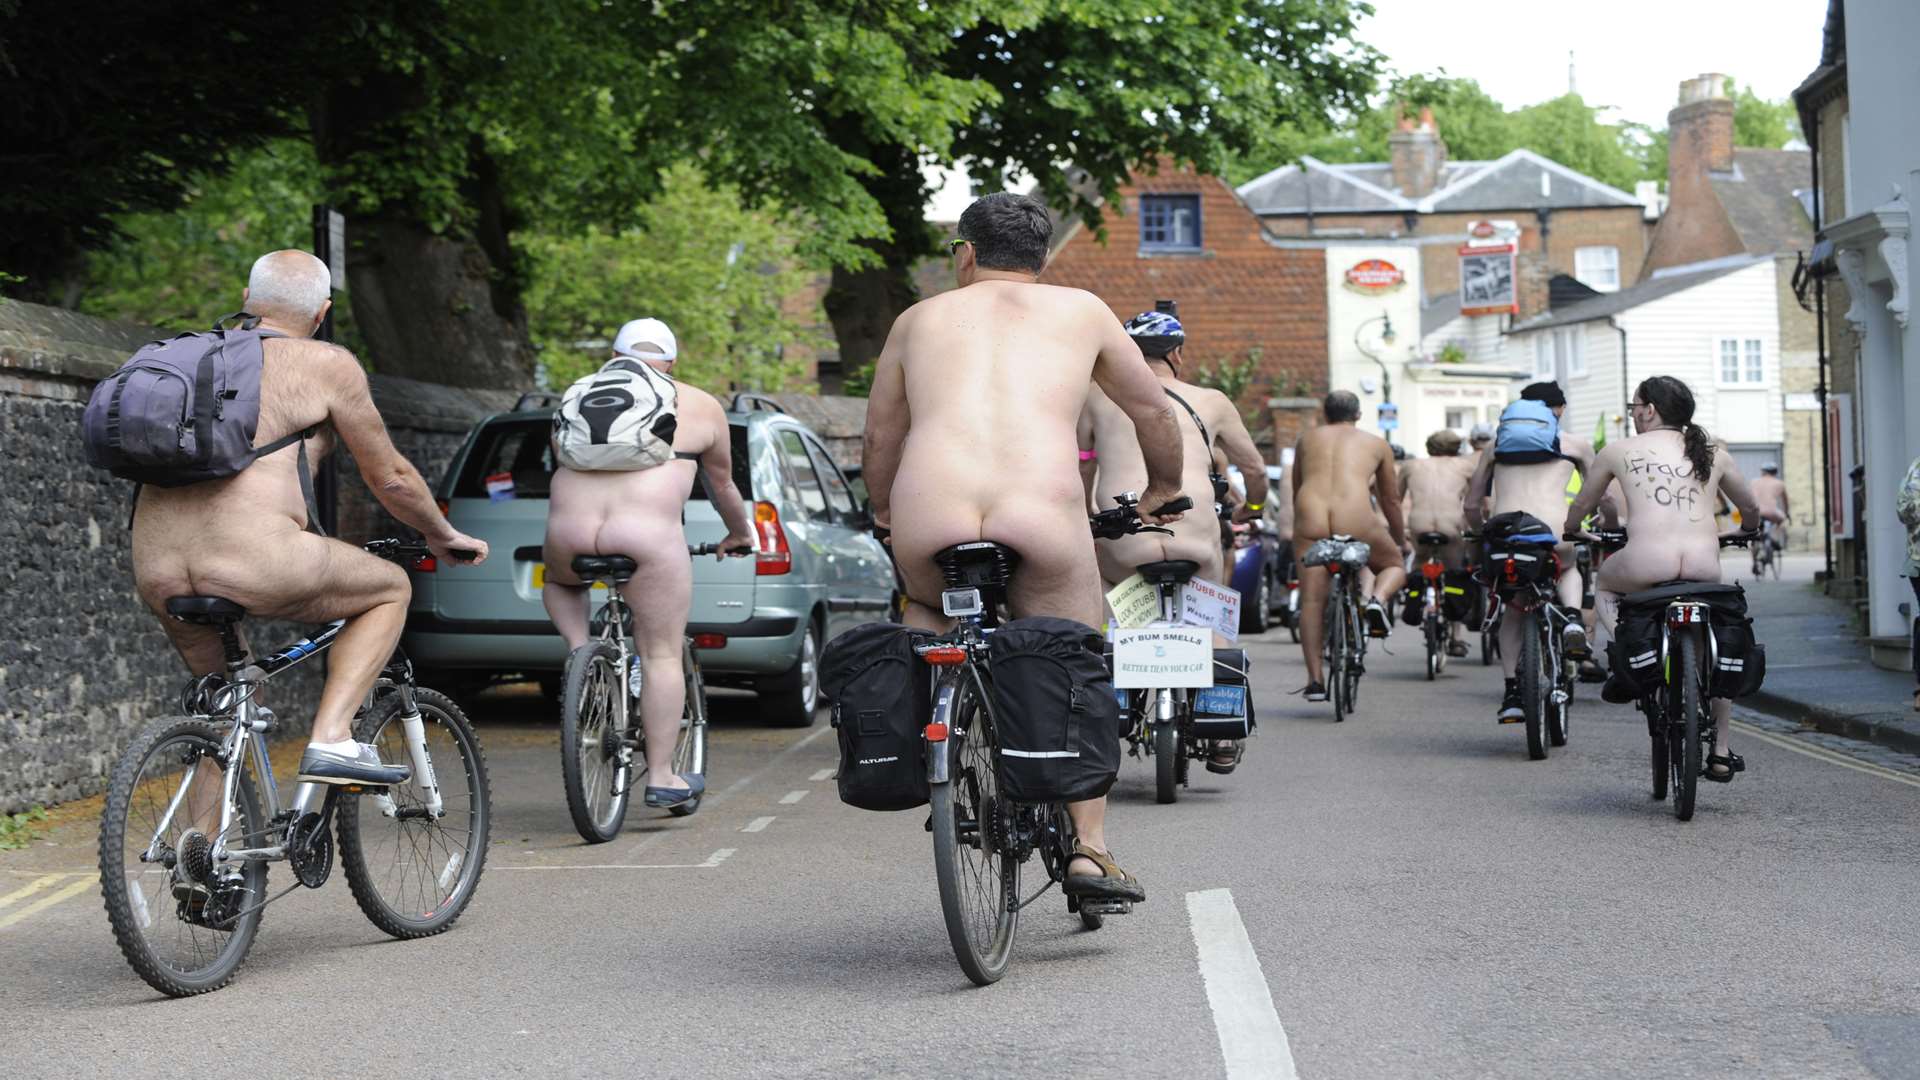 Naked cyclists protest in Canterbury